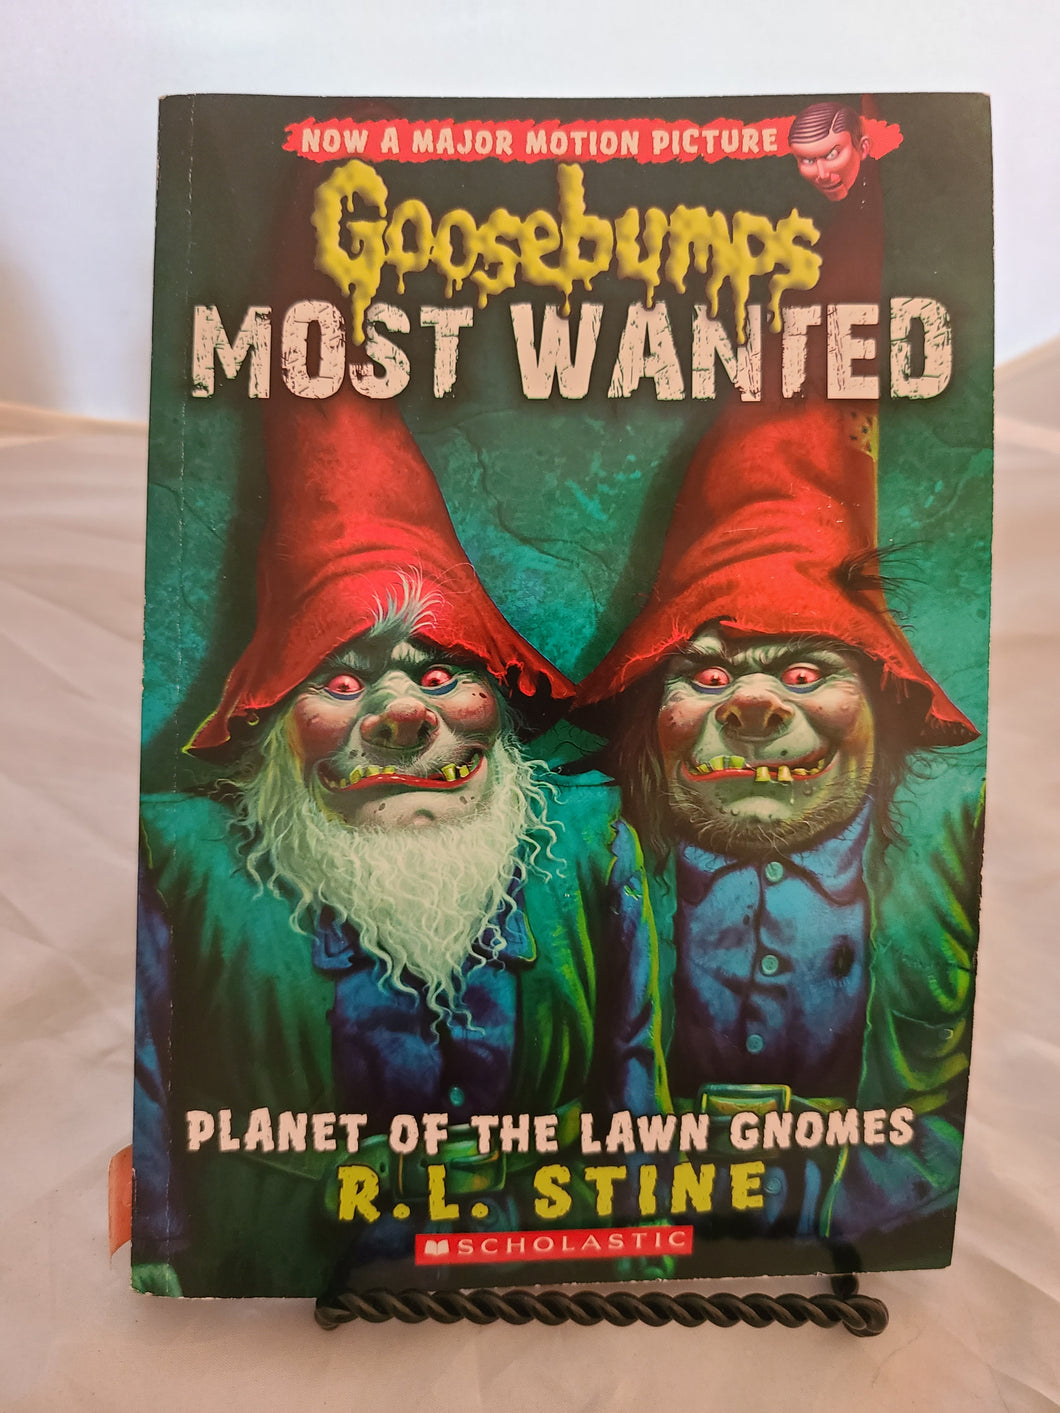 Goosebumps Most Wanted #1 - Planet of the Lawn Gnomes